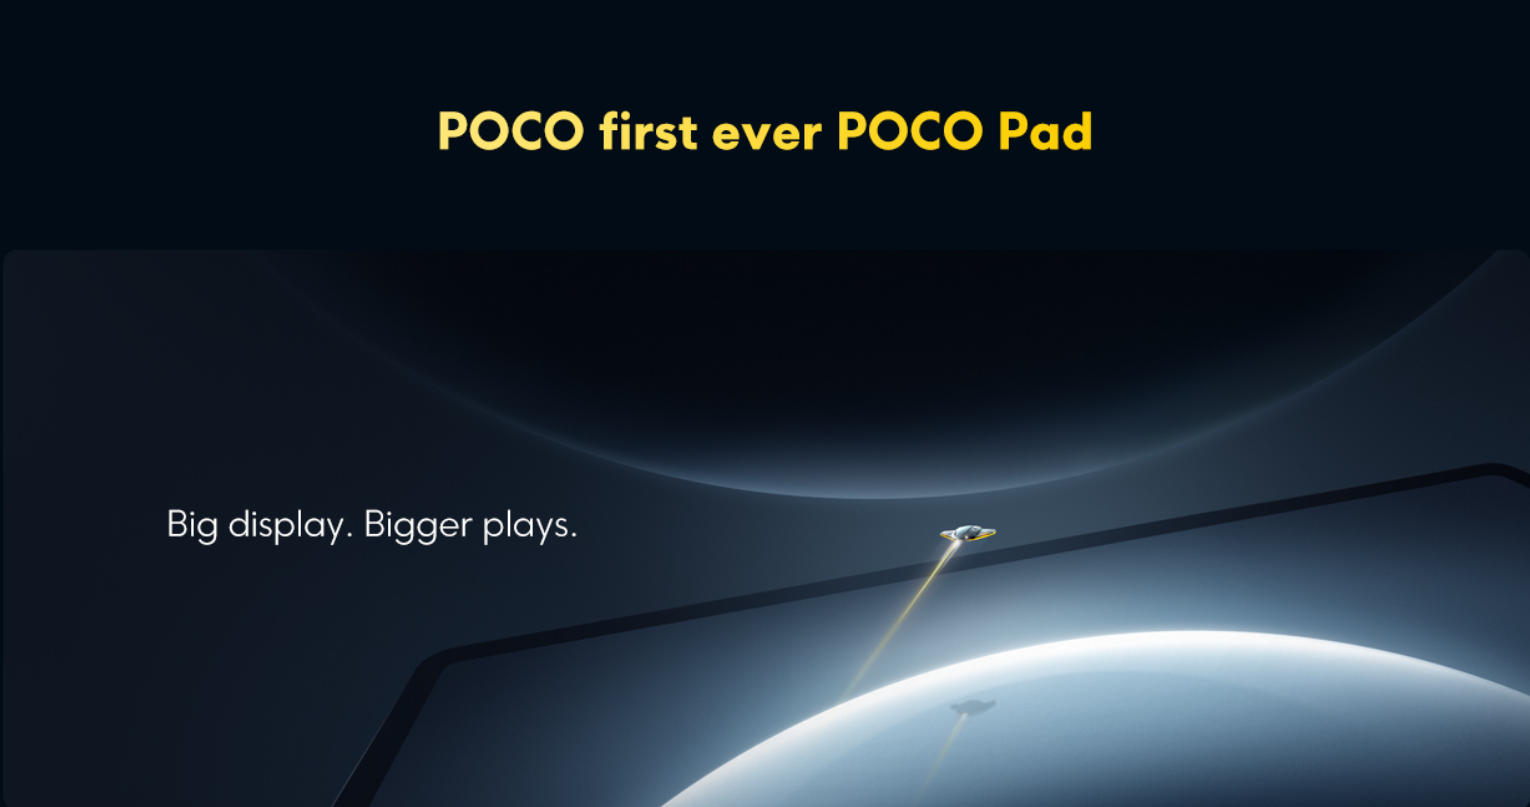 Poco enters the tablet market on 23 May